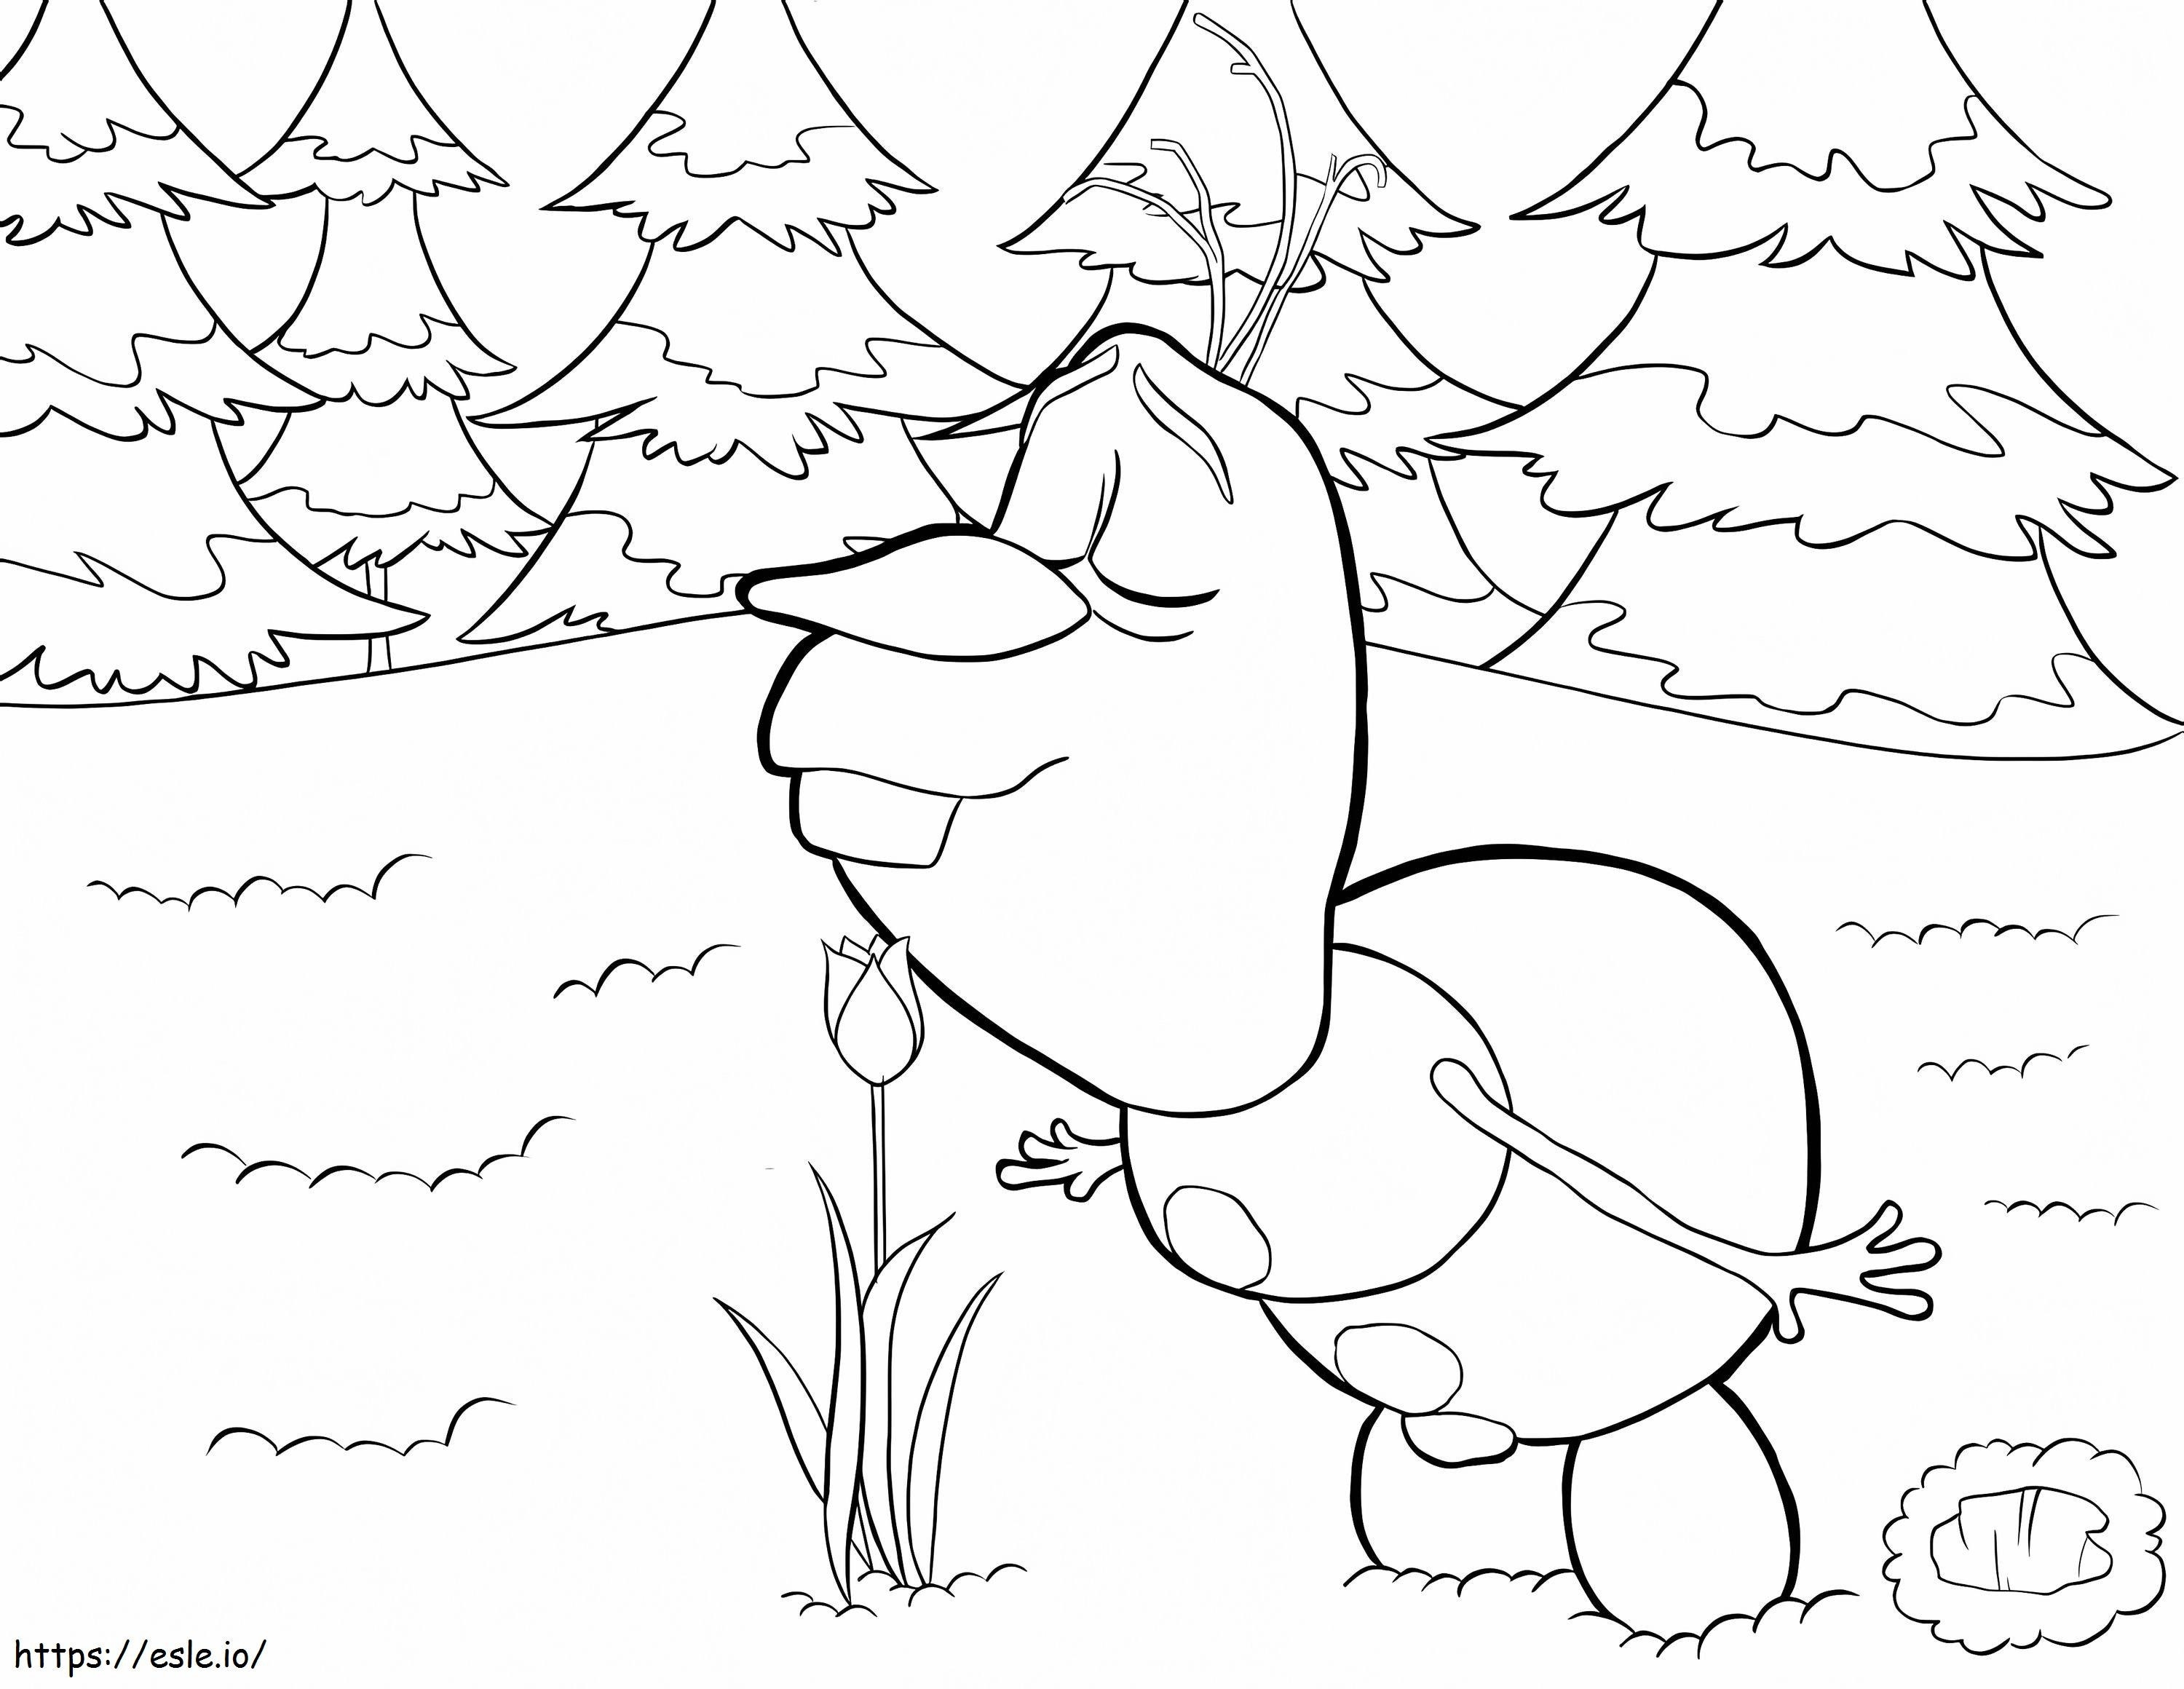 Olaf Smells The Flower coloring page